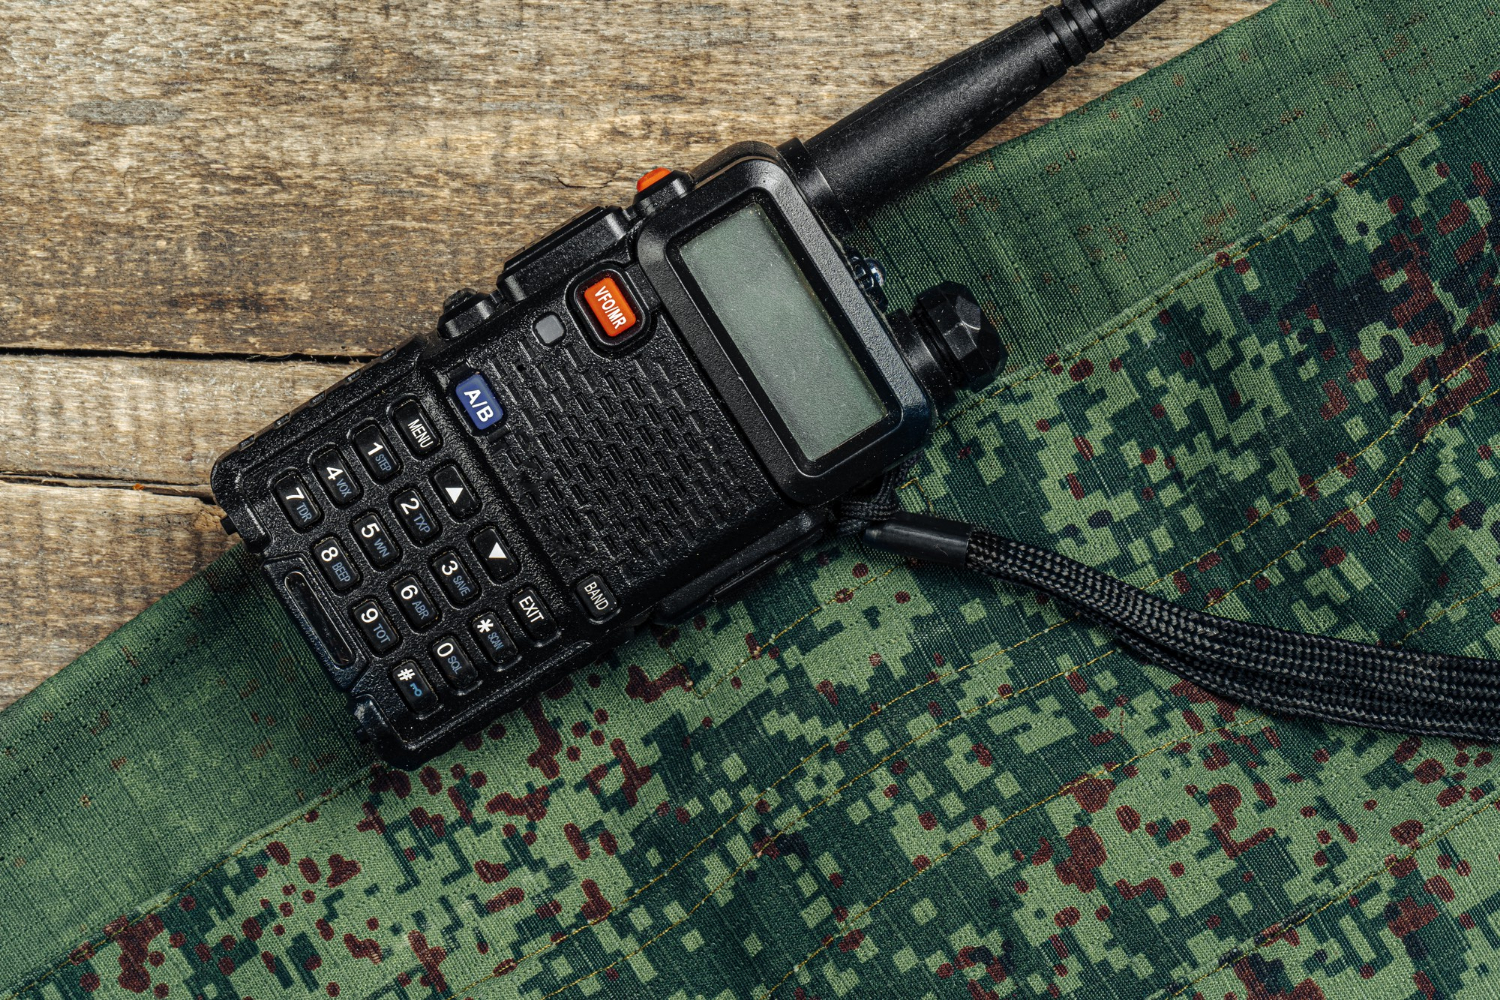 walkie-talkie-military-uniform-wooden-surface-top-view